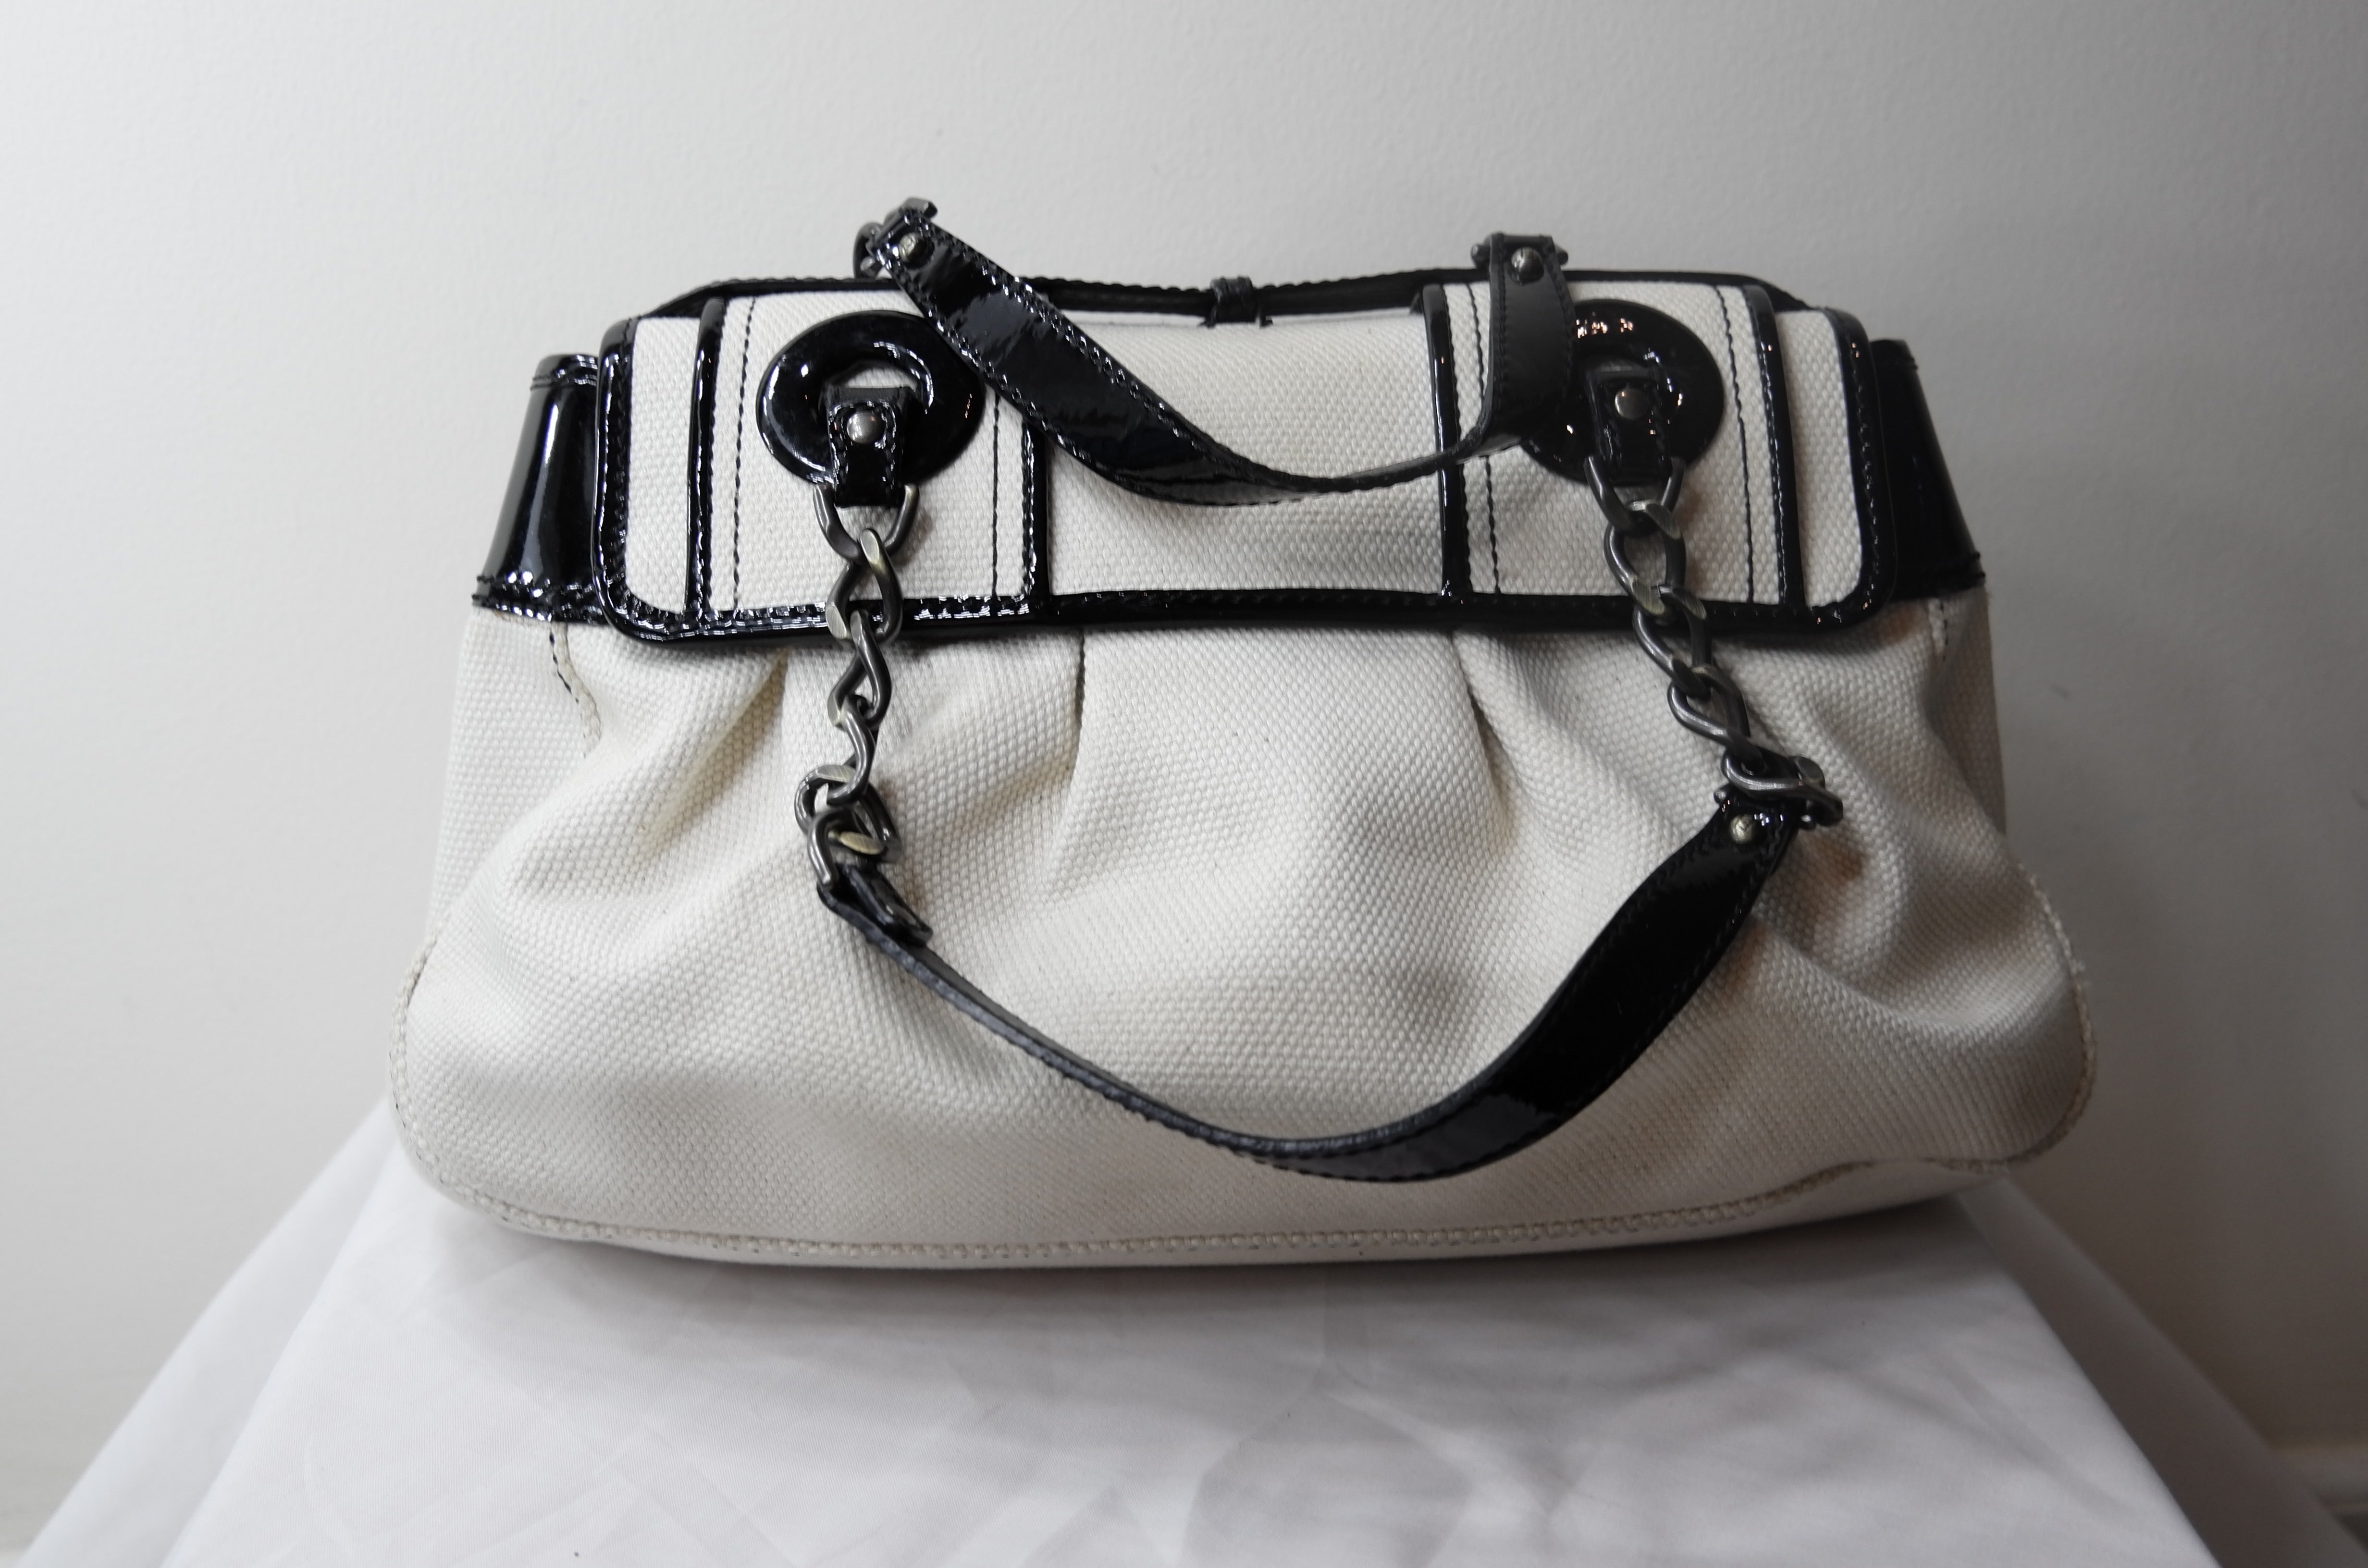 Fendi B Bag in White Fabric and Black Patent Leather